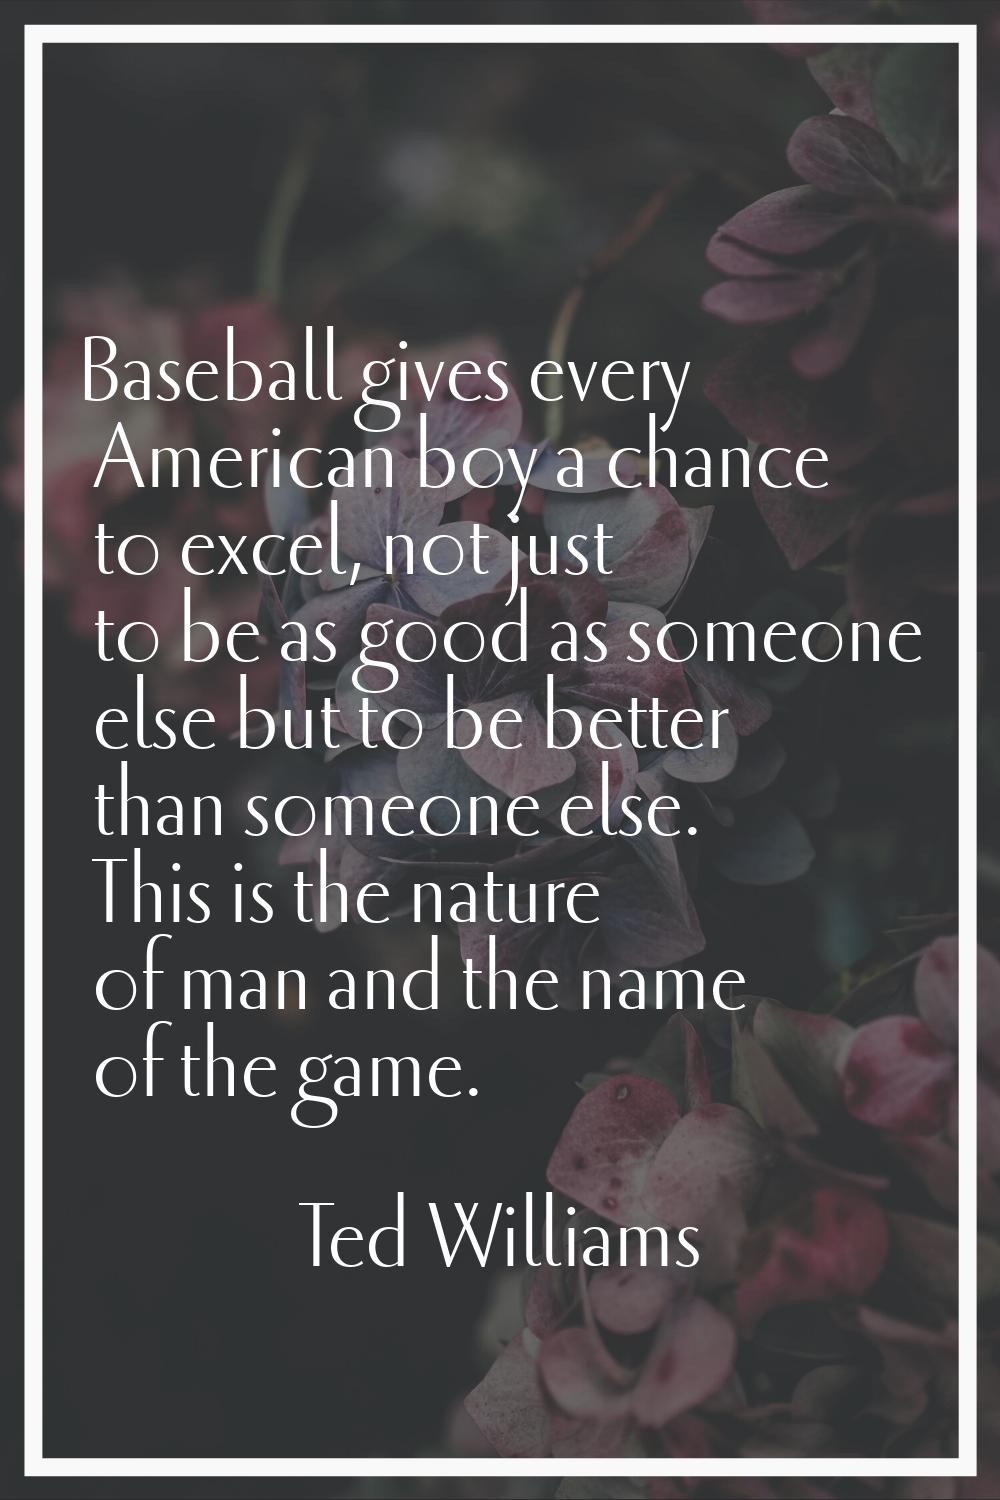 Baseball gives every American boy a chance to excel, not just to be as good as someone else but to 